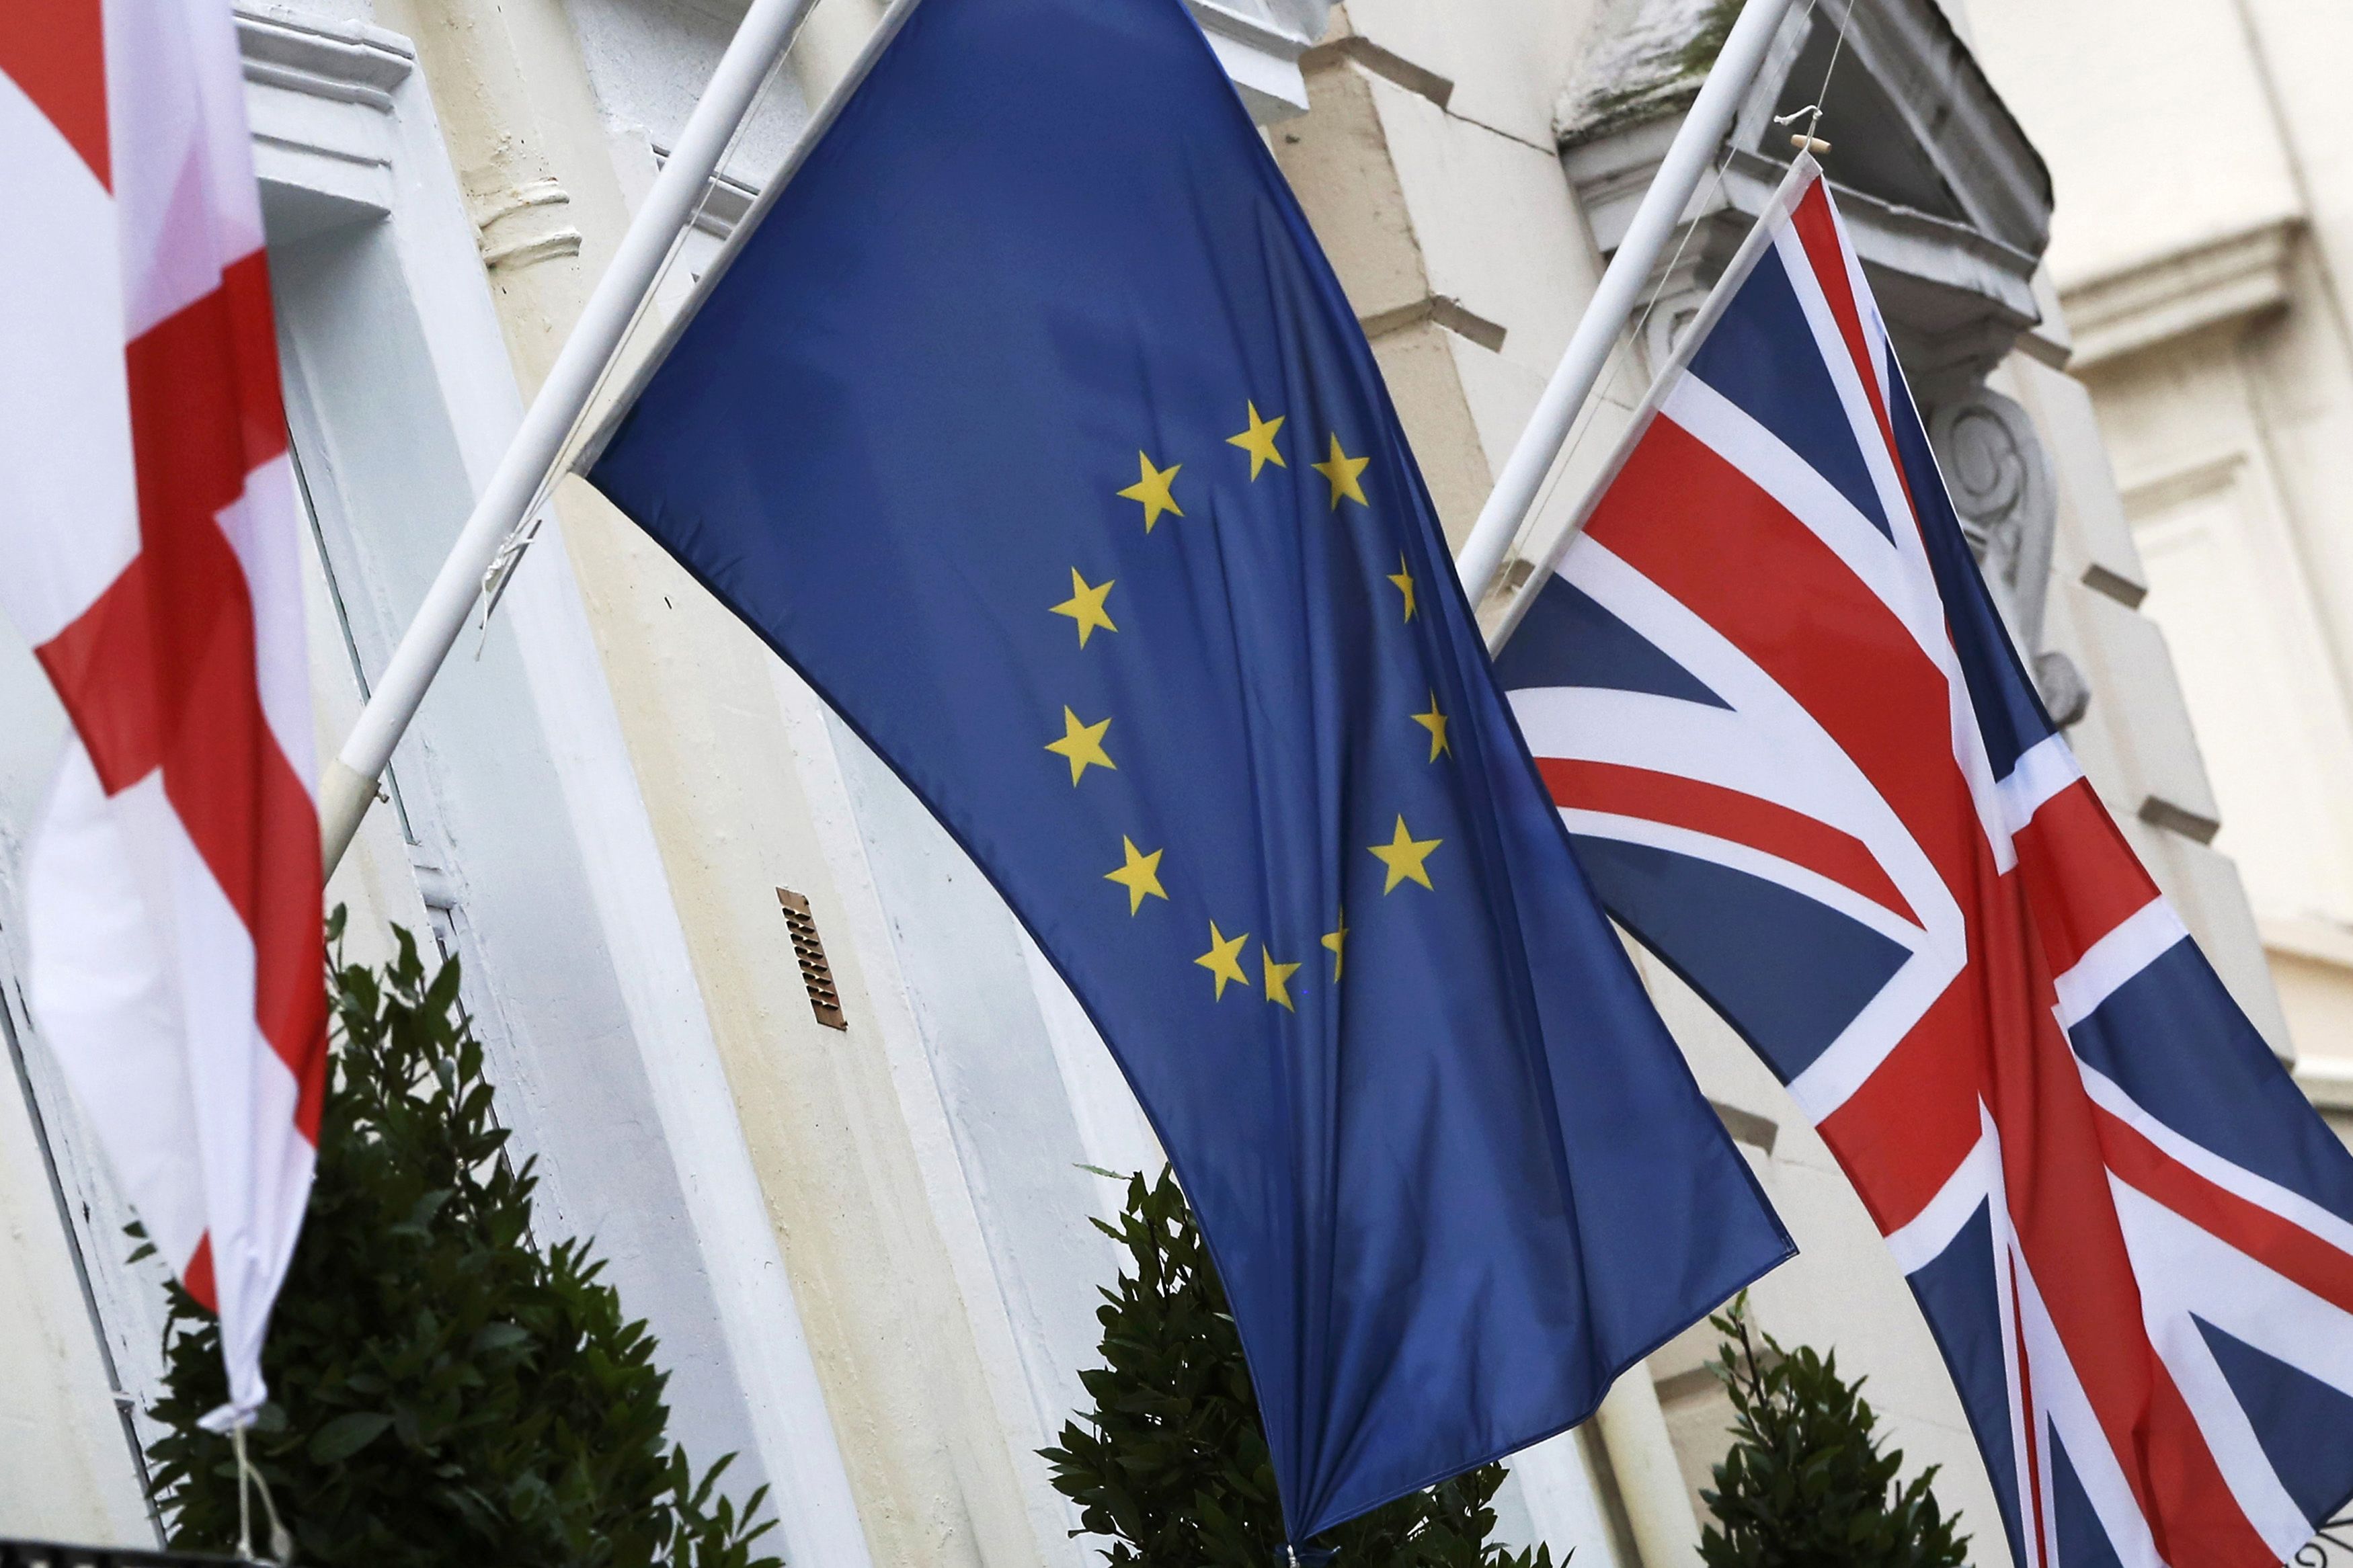 The St George's Cross, European Union and Union flags fly outside a hotel in London, Britain, December 17, 2015. A former minister in Prime Minister David Cameron's government has set up a group to back Britain's renegotiation of its European Union membership and warned of the dangers of leaving the trading bloc. 'Conservatives for Reform in Europe' will support attempts to improve the terms of Britain's 43-year-old EU membership ahead of an in/out referendum which could come as soon as June. REUTERS/Luke MacGregor/Files